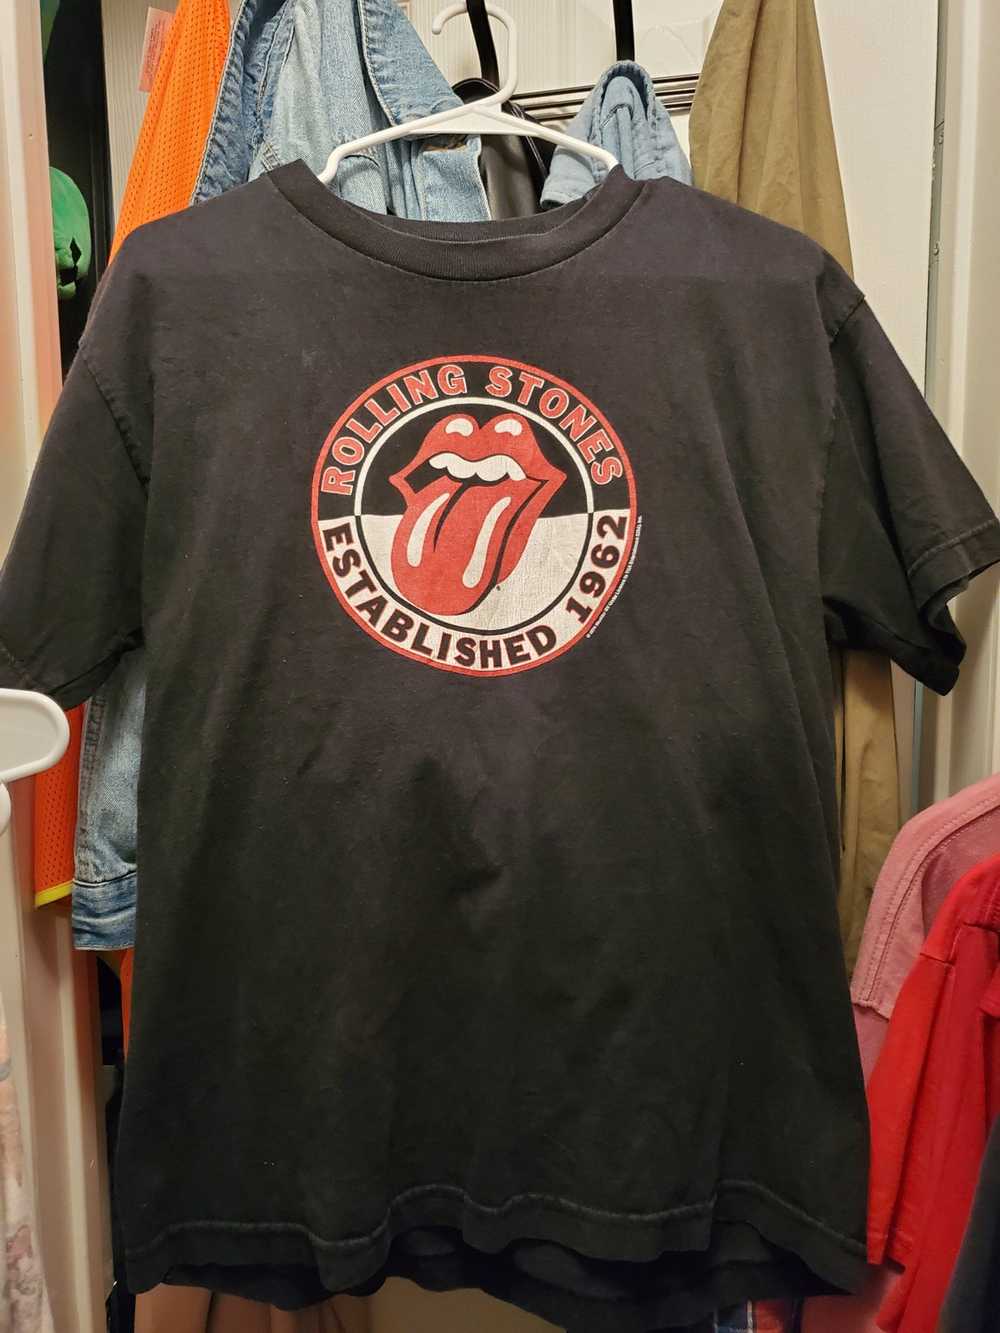 Alstyle Vintage 2004 Rolling stone tee - image 2